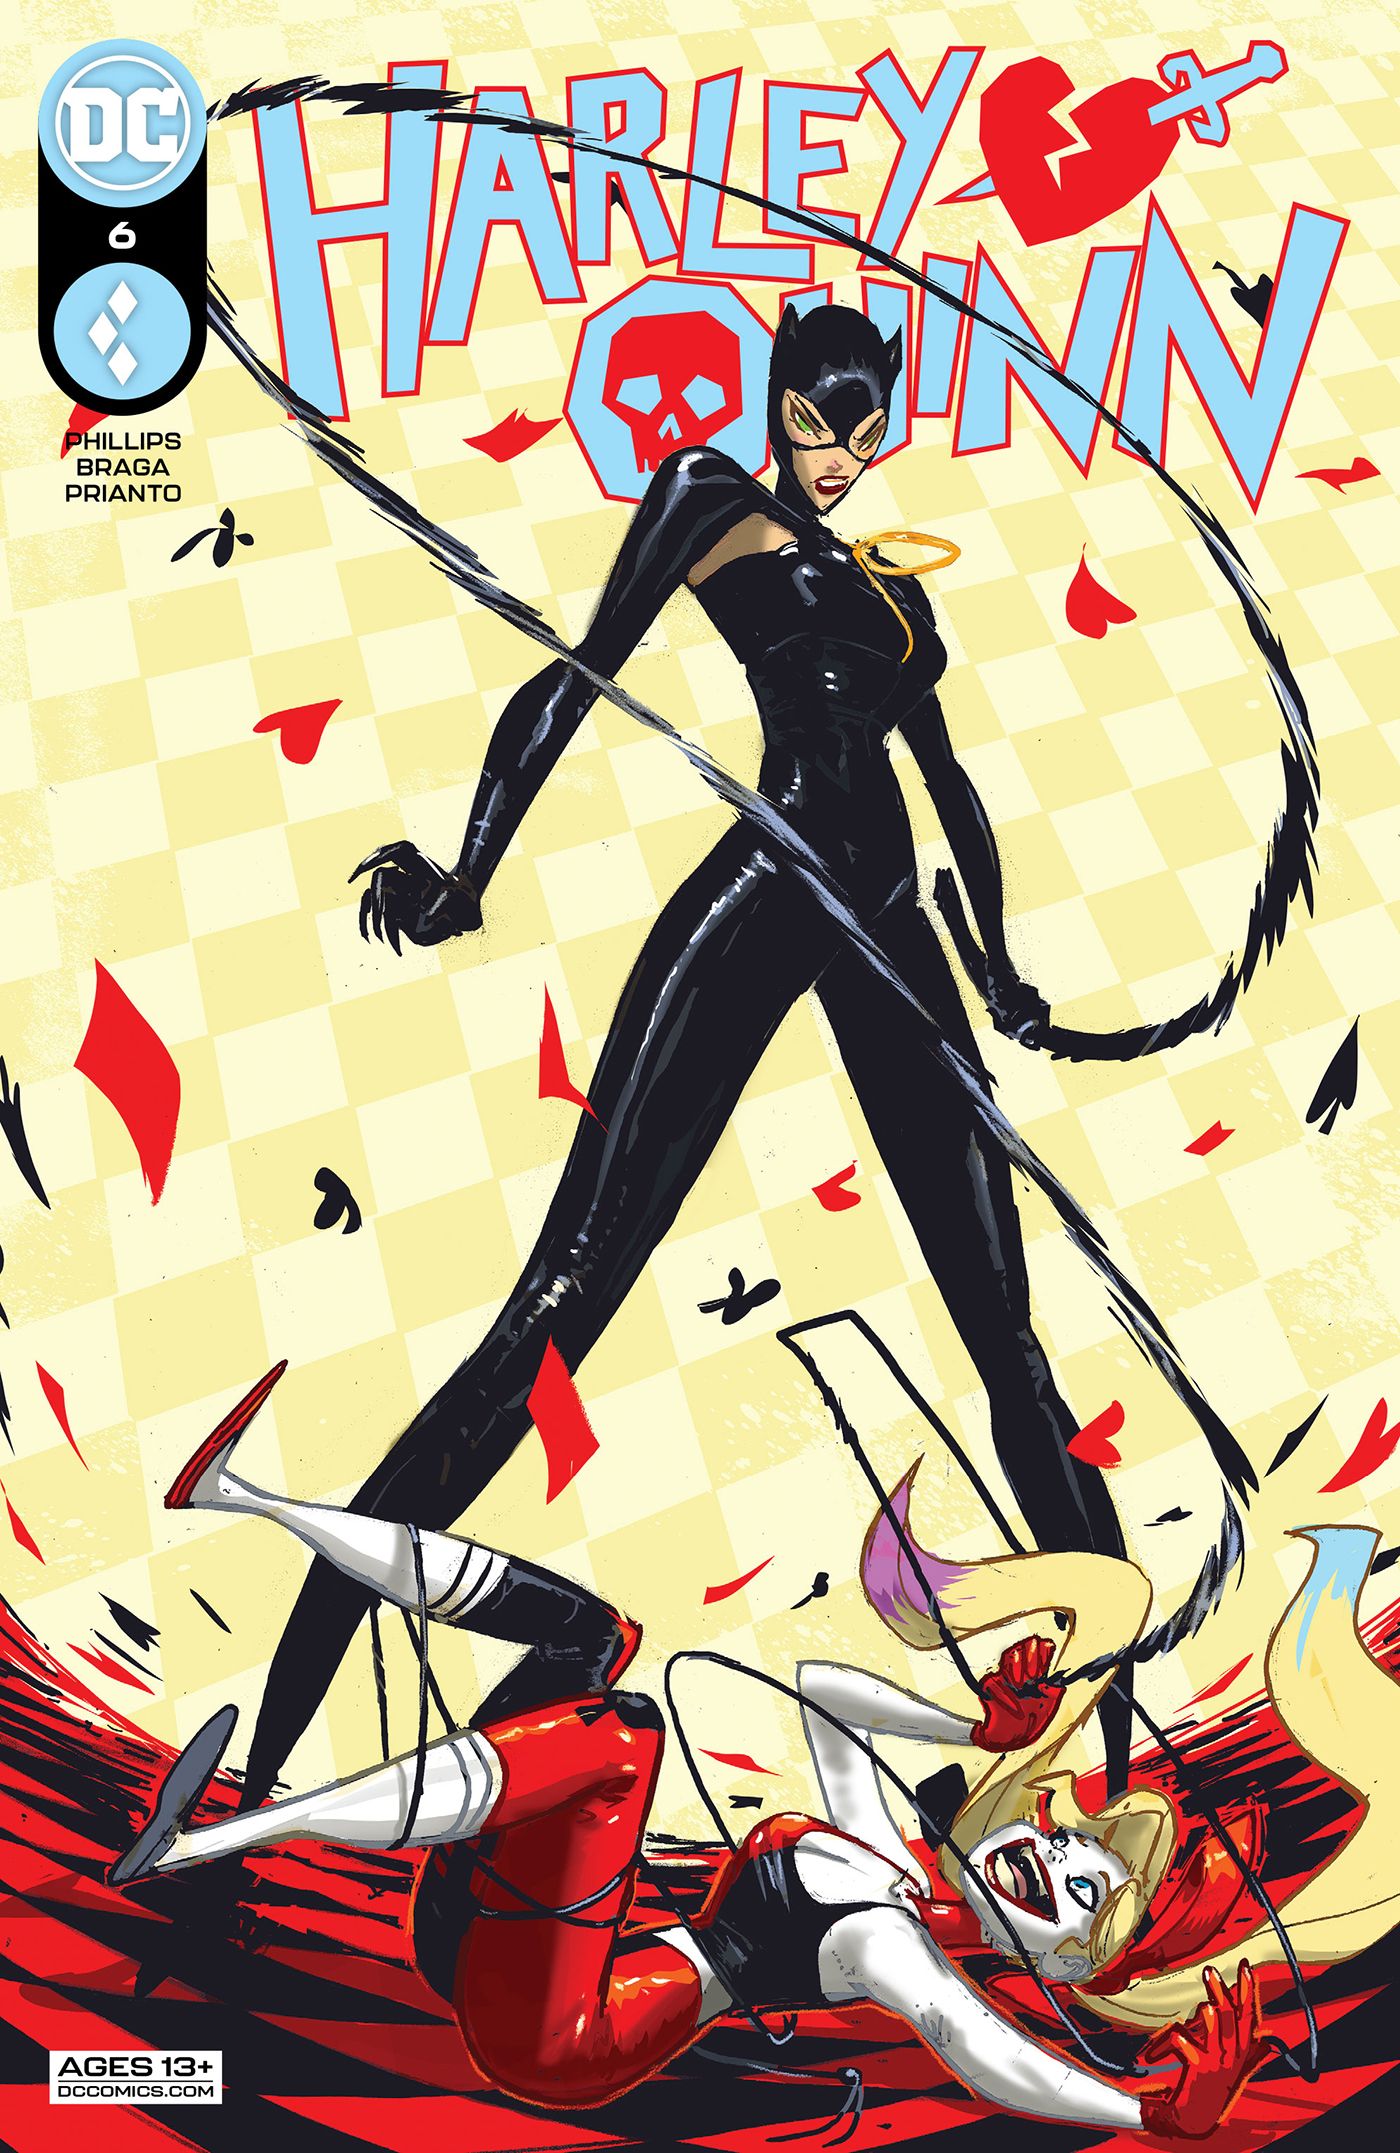 Catwoman on the cover of Harley Quinn #6.